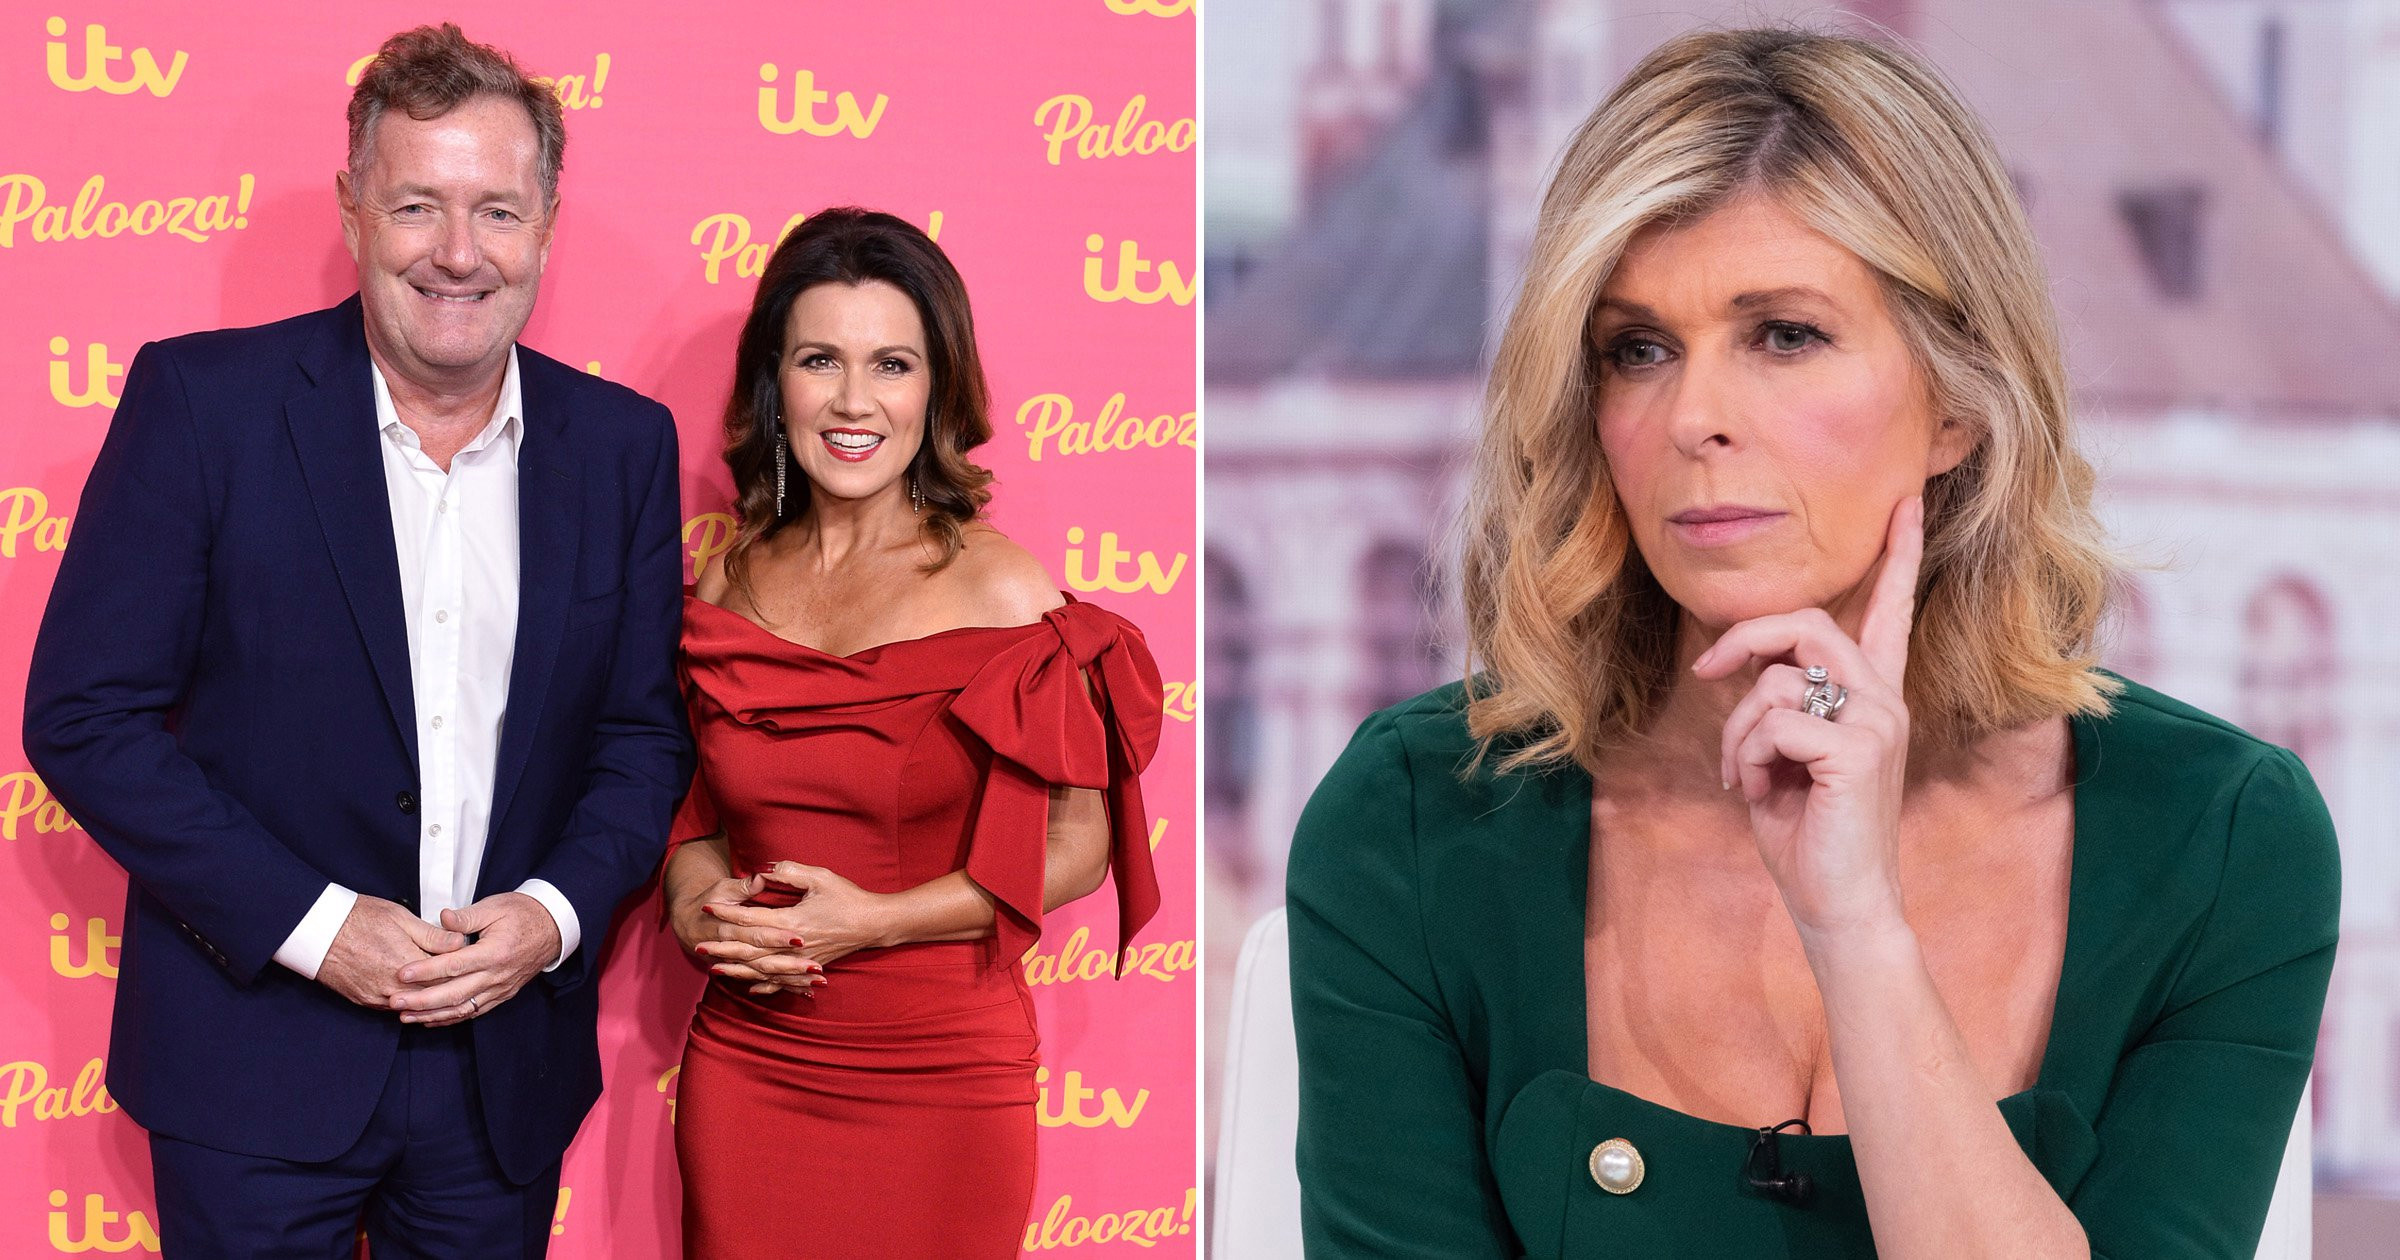 Kate Garraway is happy being ‘number two’ to Piers Morgan and Susanna Reid on Good Morning Britain